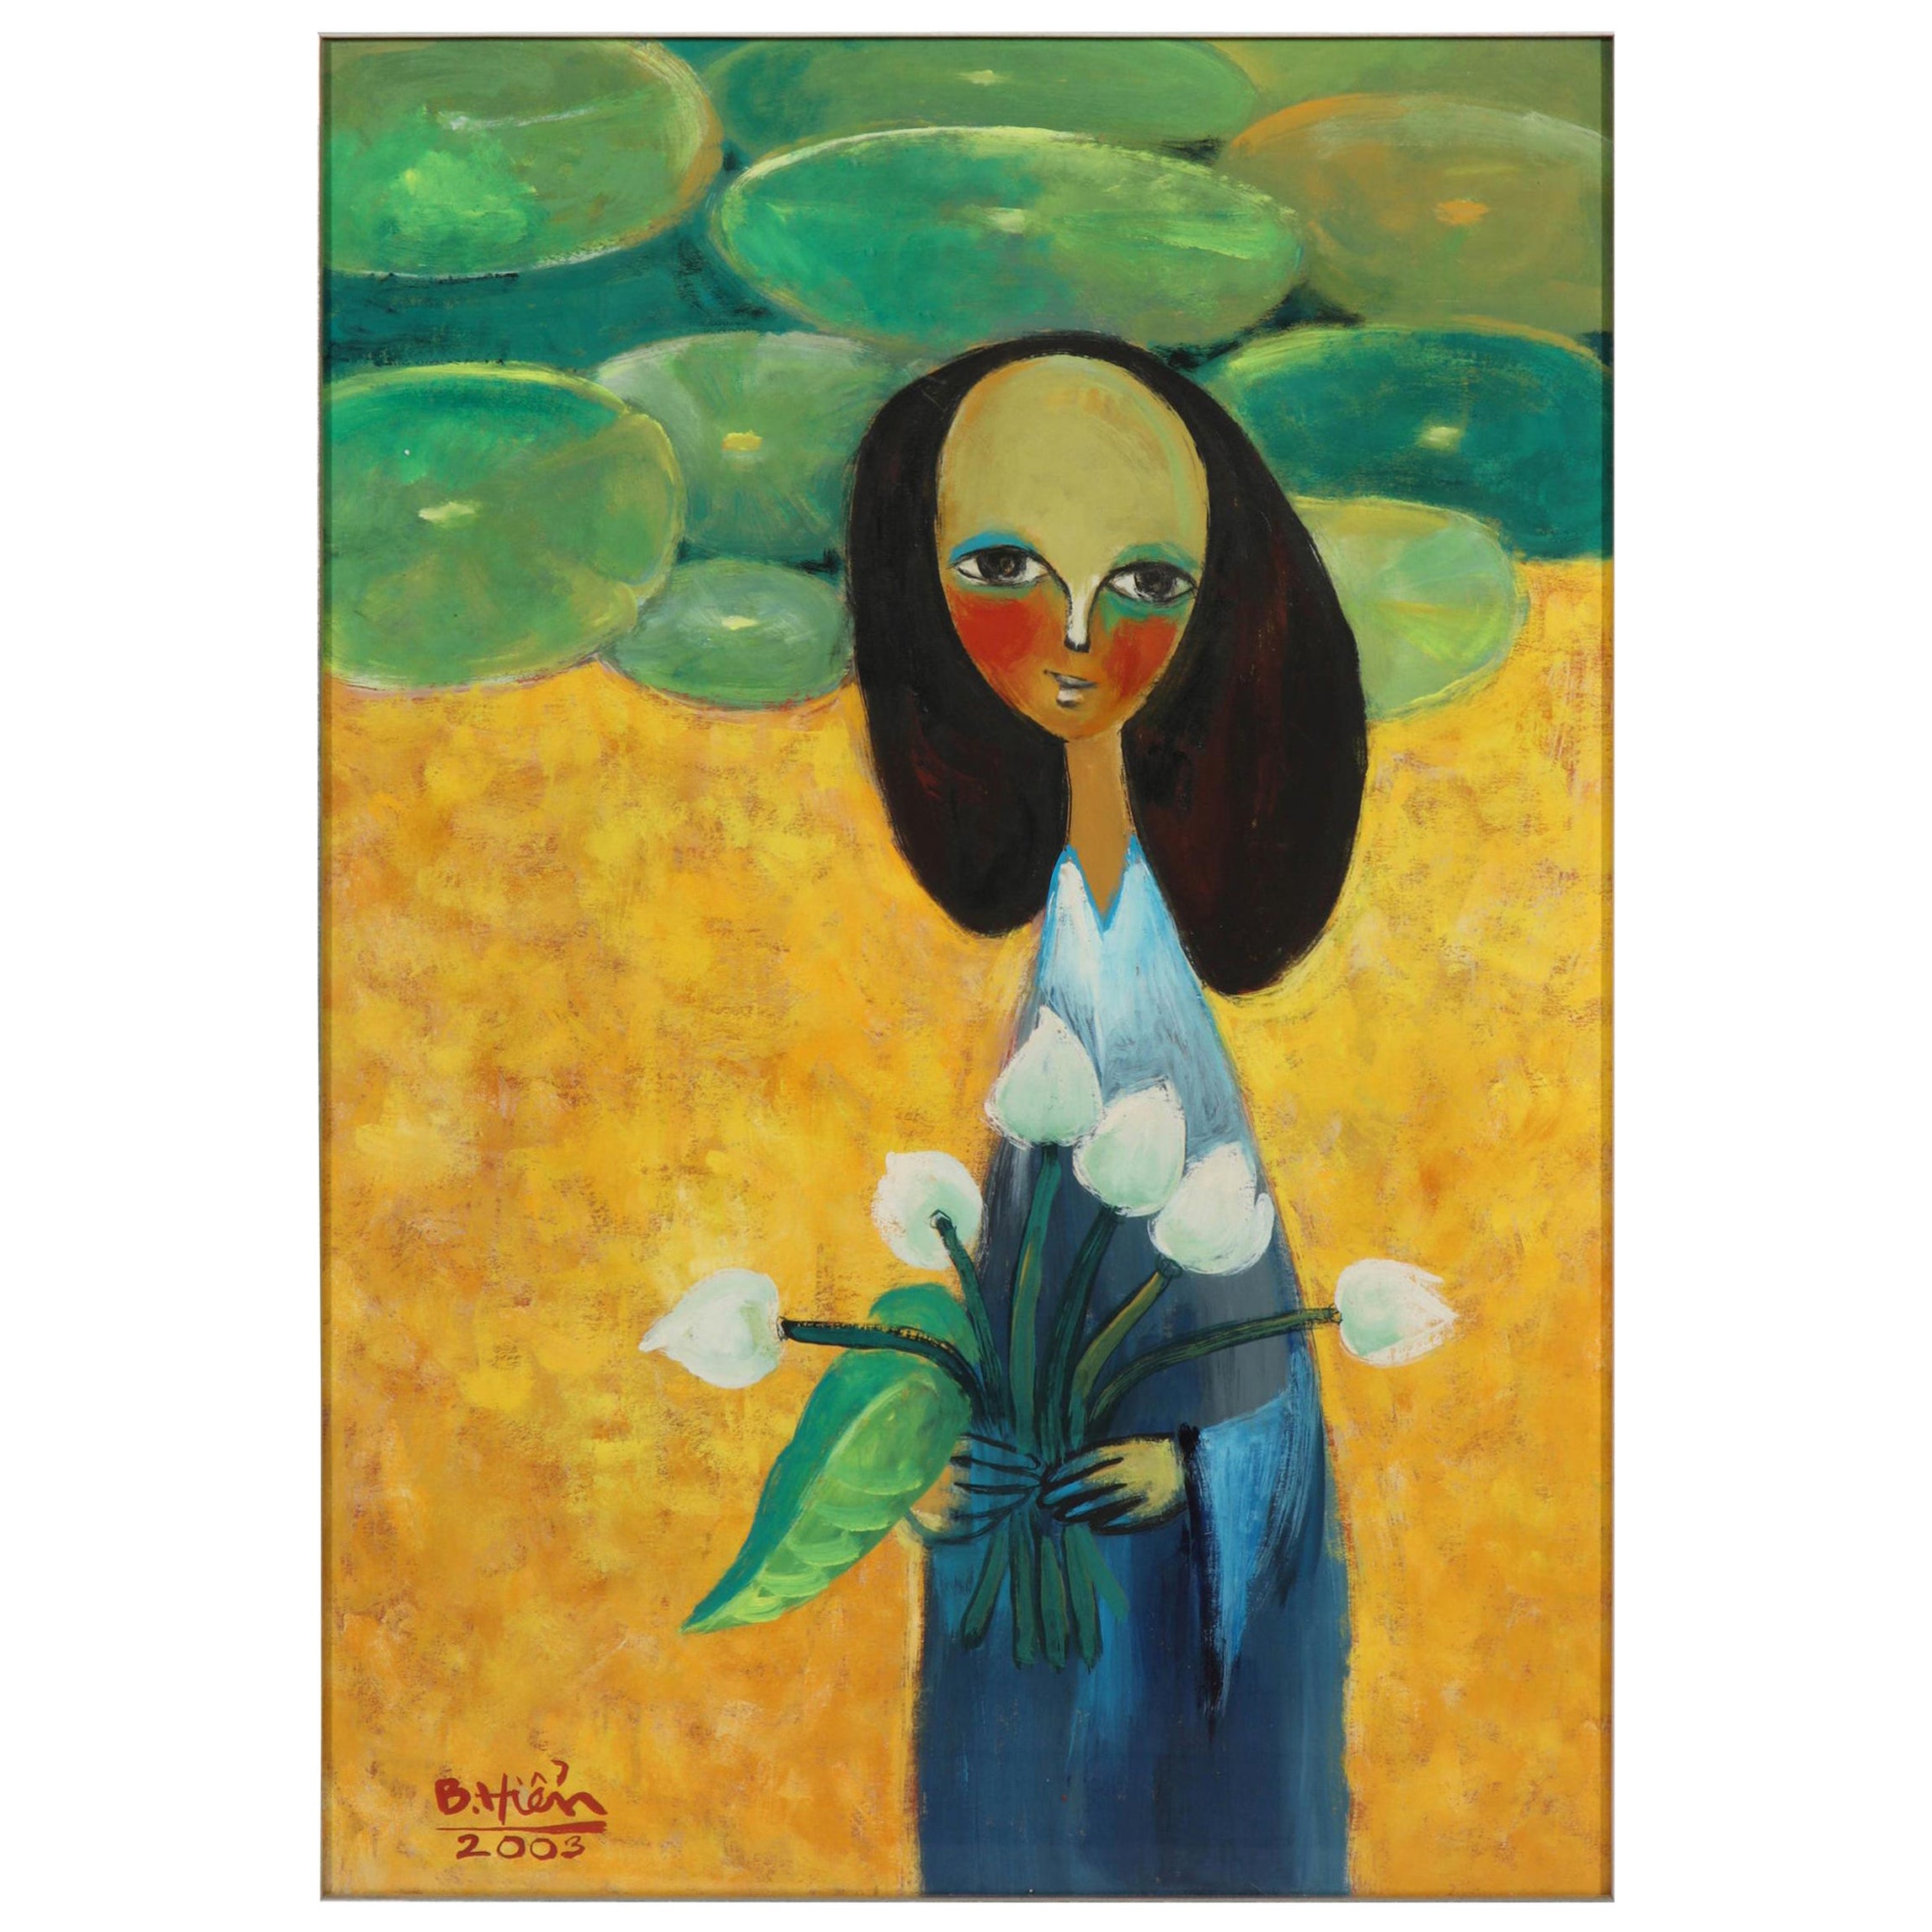 Painting of a Lady with Flowers, Green, Yellow and Blue, Hanoi Artist, On Paper